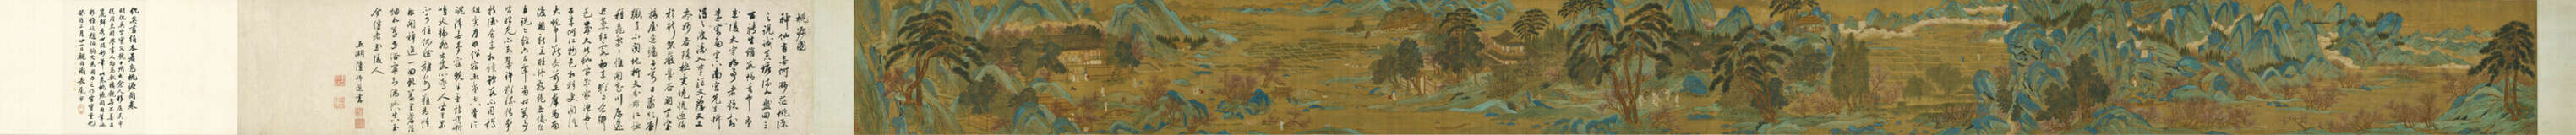 QIU YING (ATTRIBUTED TO, 1495-1552) - photo 2